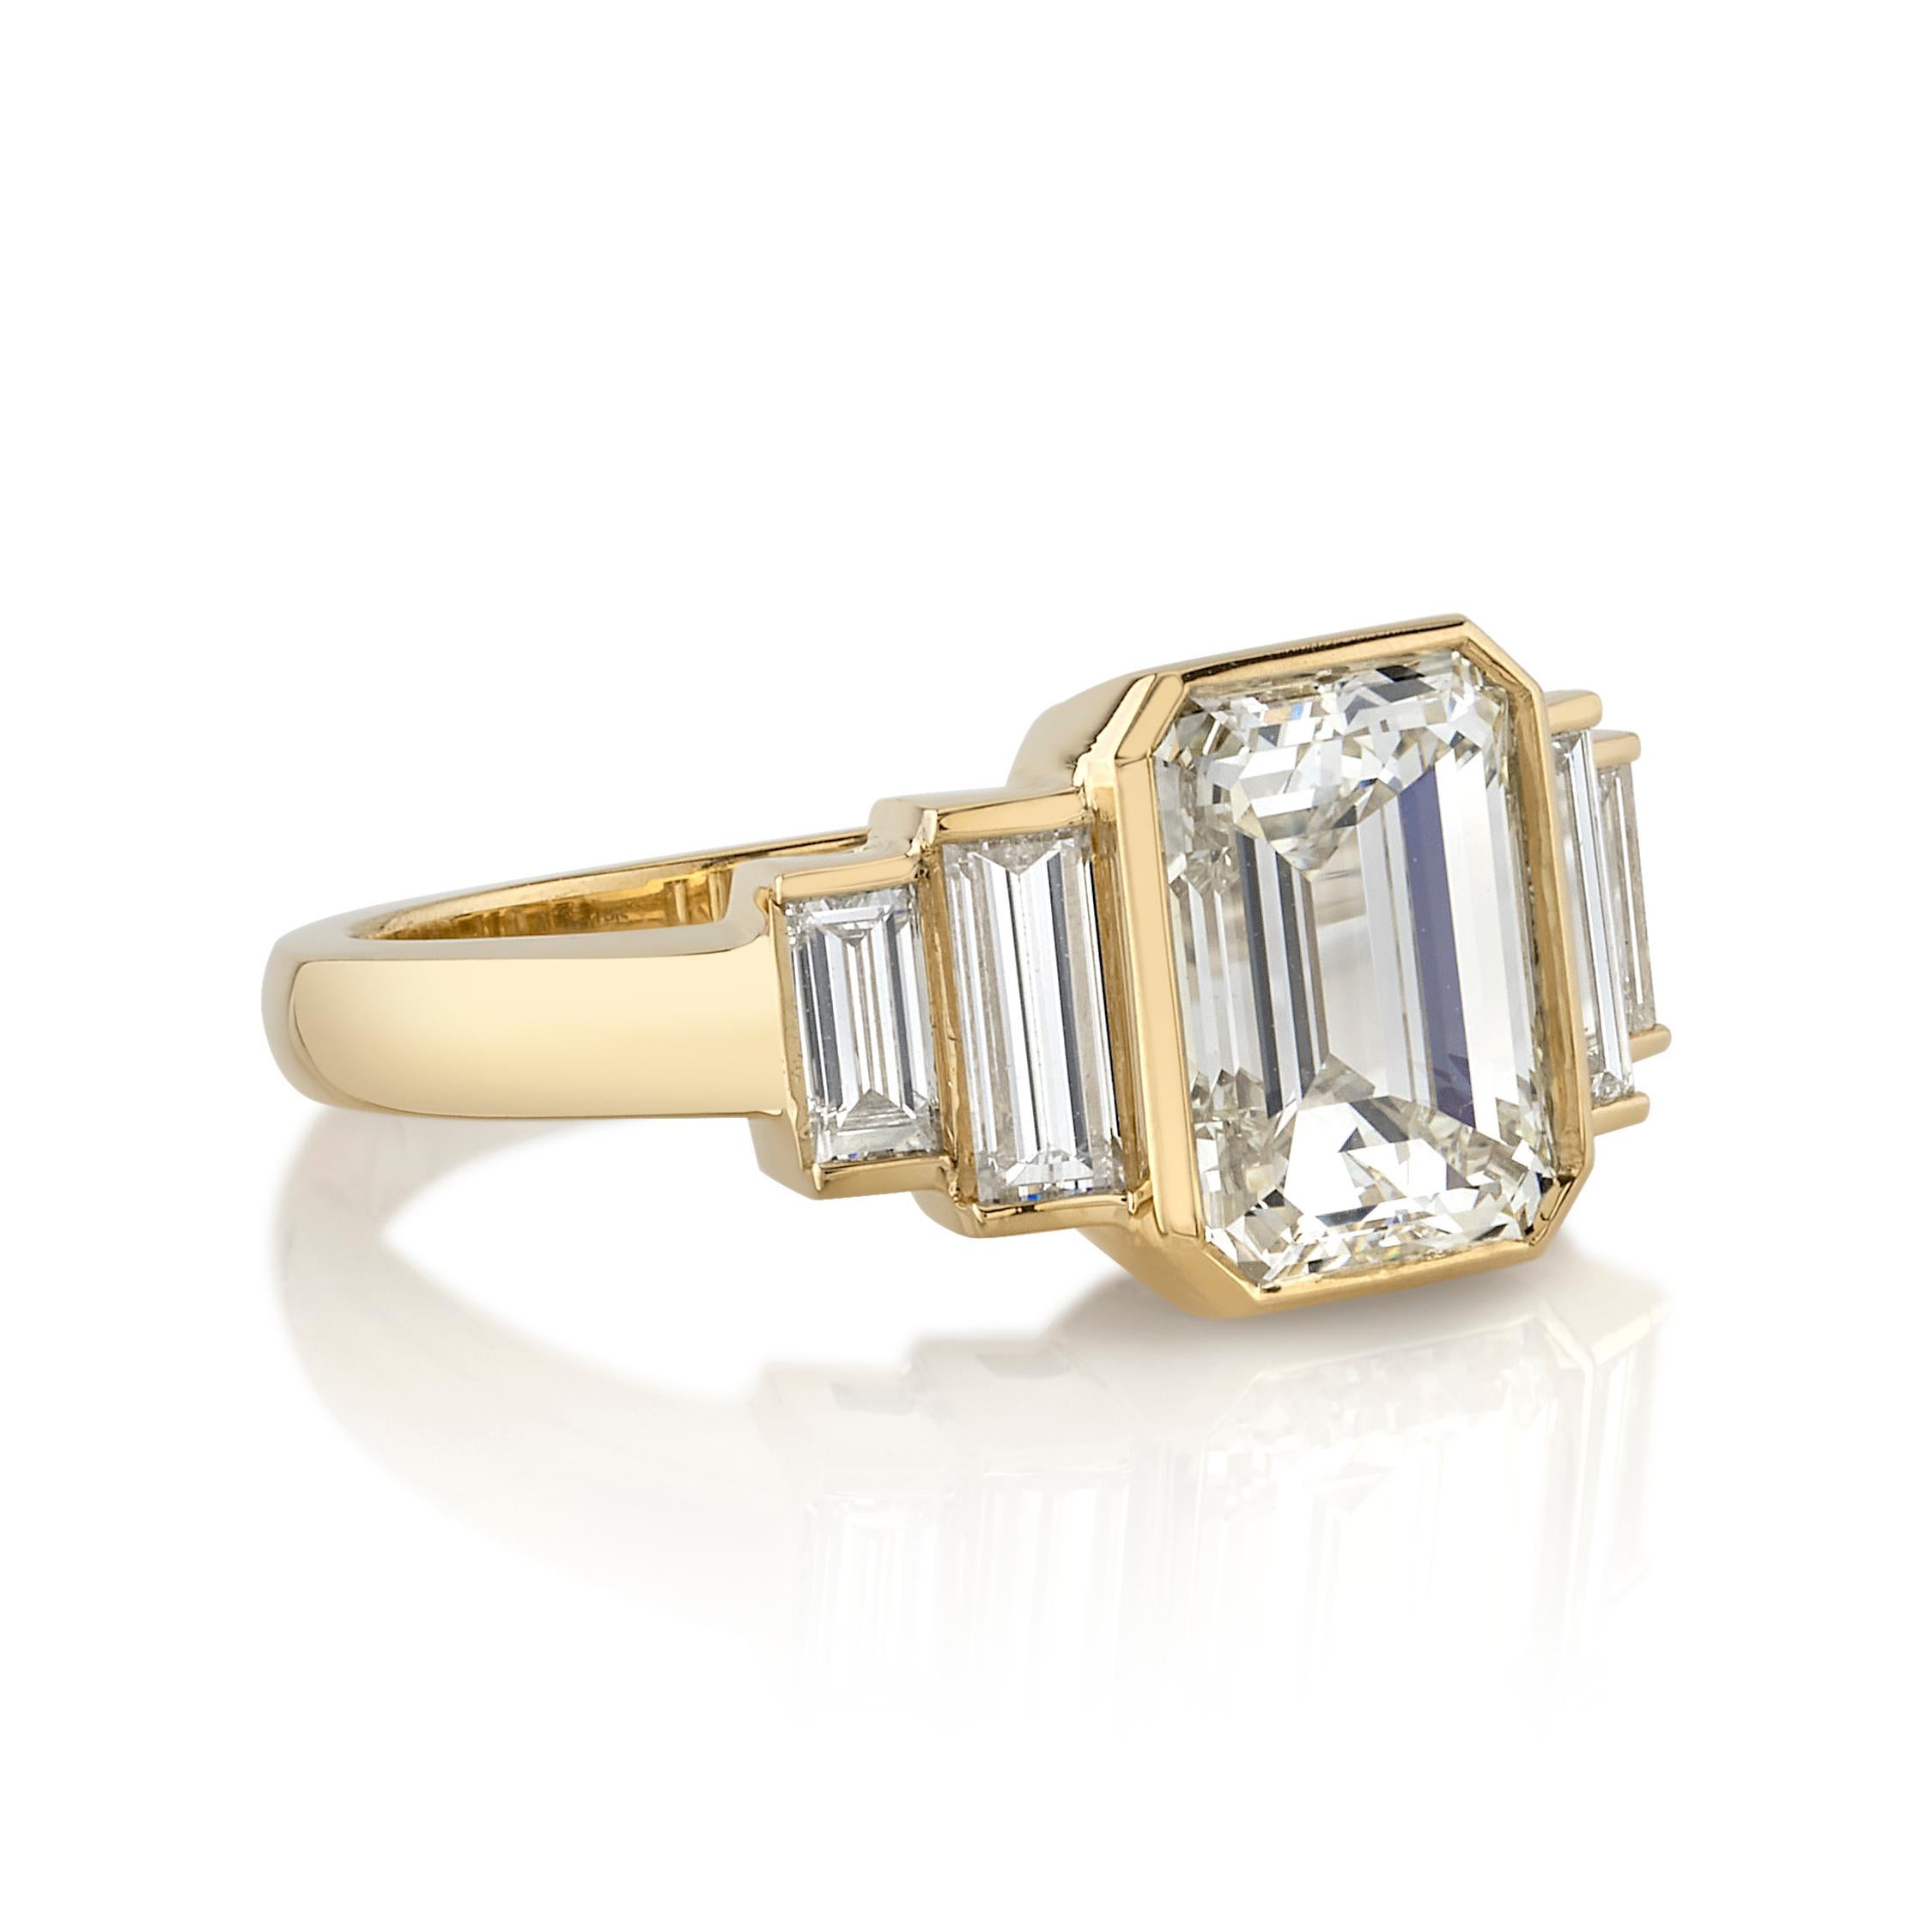 2.42ct M/VS2 GIA certified Emerald cut diamond with 0.66ctw Baguette cut accent diamonds set in a handcrafted 18K yellow gold mounting.

Ring is currently a size 6 and can be sized to fit. 

Our jewelry is made locally in Los Angeles and most pieces